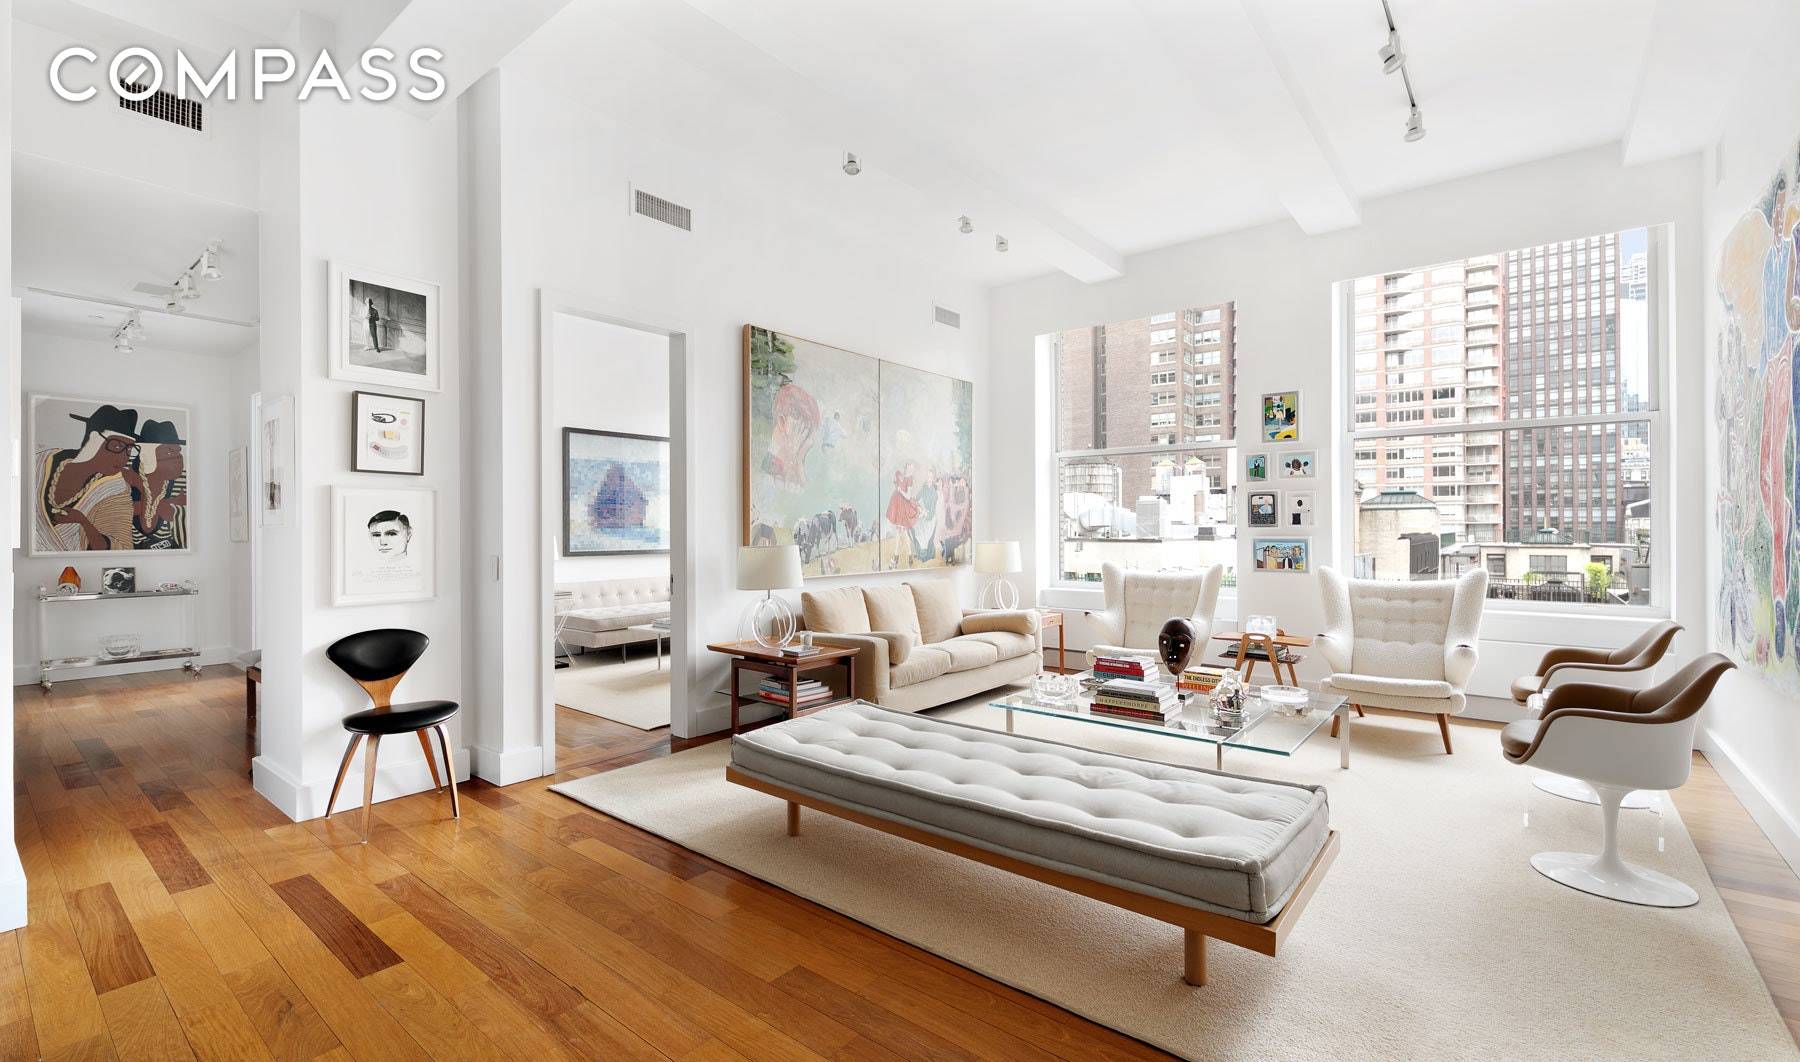 Located on the perimeter of Madison Square Park in New York s most engaging neighborhood, Apartment 12E is customized from its original floorplan to create wonderful architectural balance and flow.